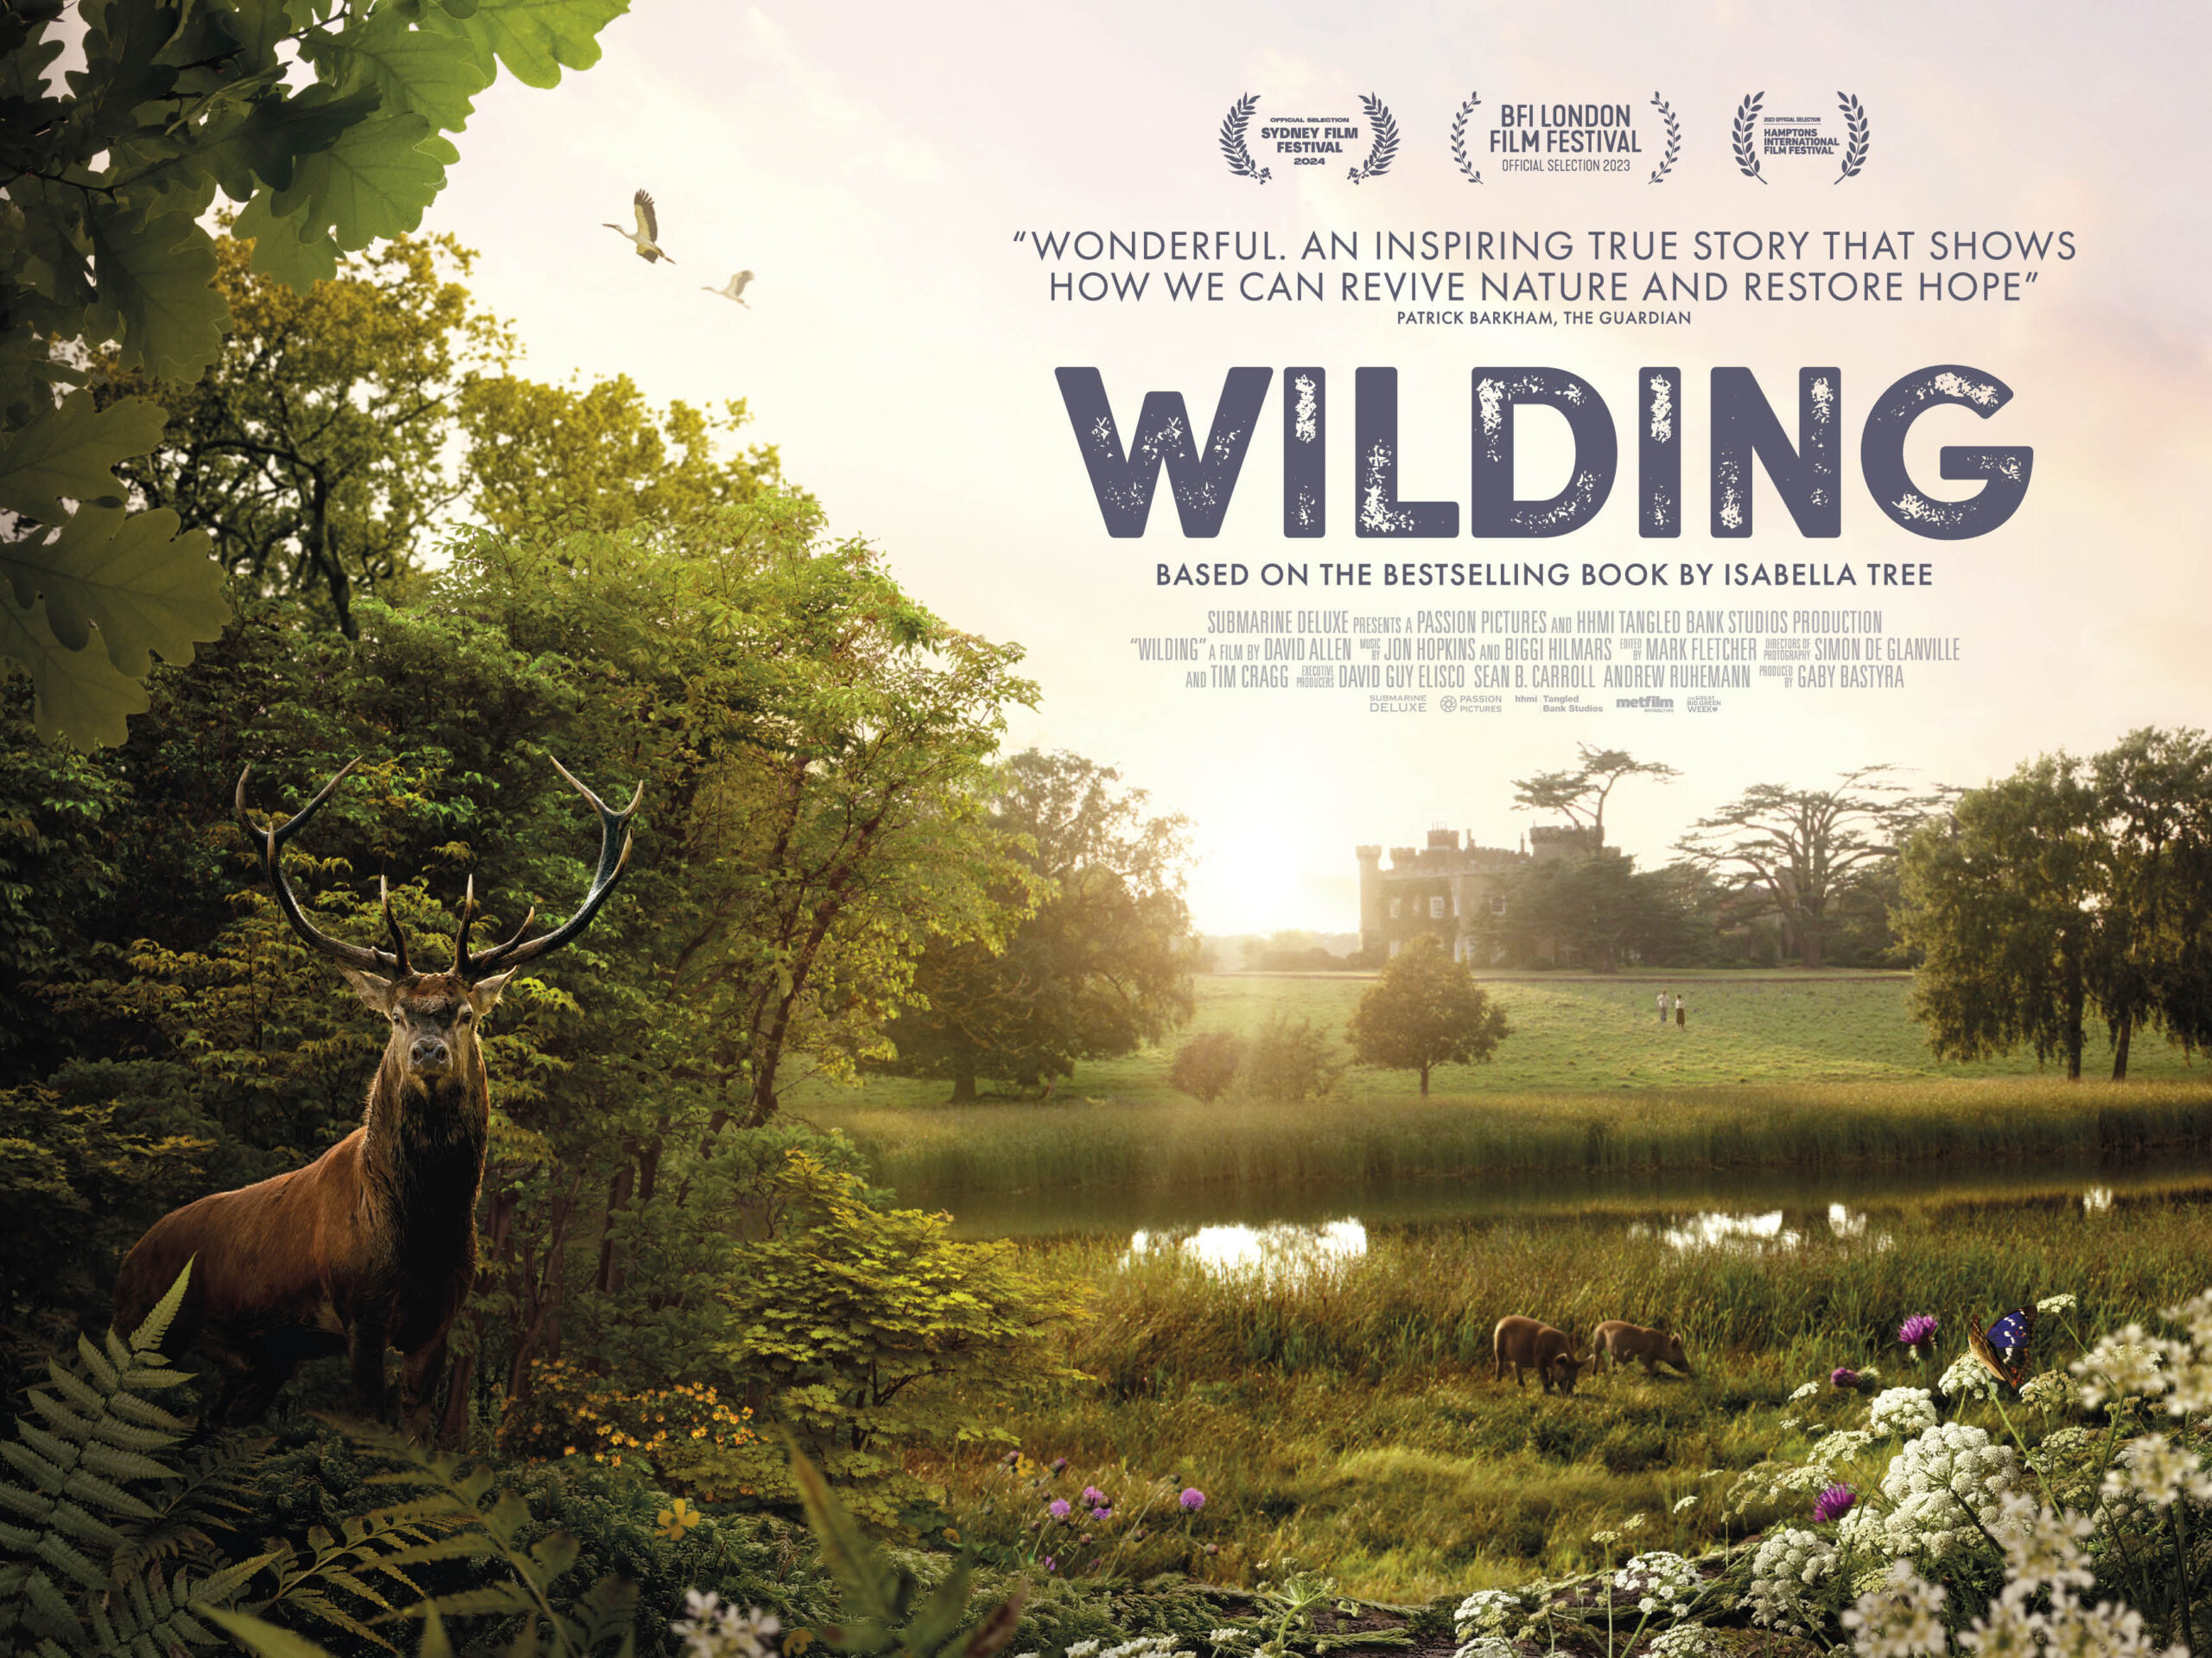 8 August: Wilding (film screening) SOLD OUT